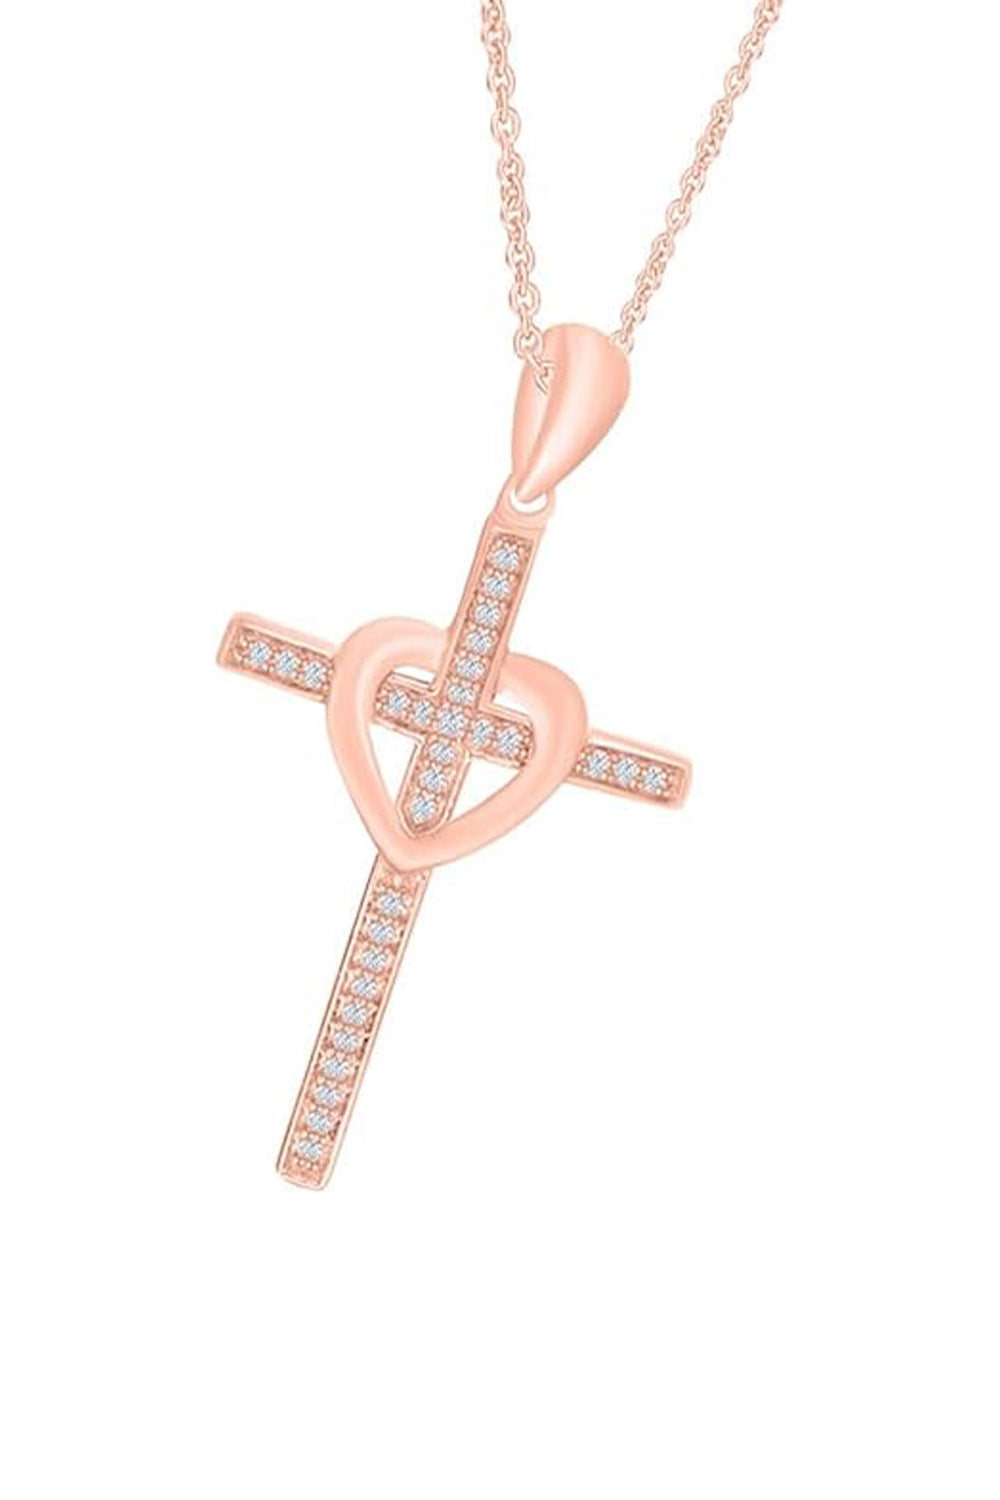 Rose Gold Color Heart Cross Pendant Necklace, Cross Necklace Religious